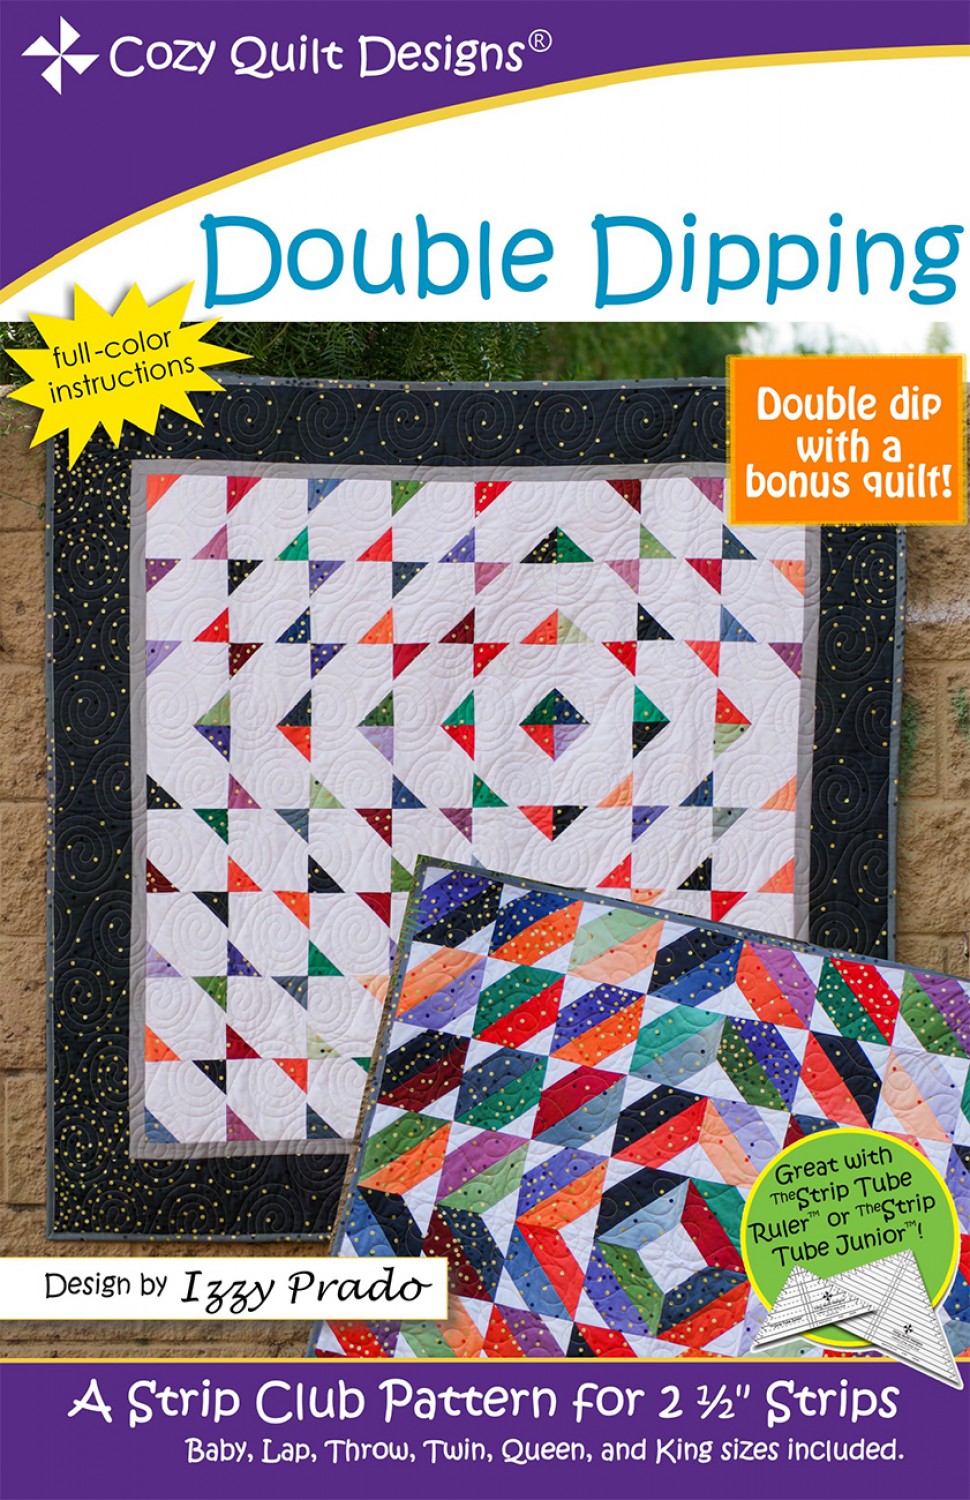 Cozy Quilt Designs Double Dipping Quilt Pattern